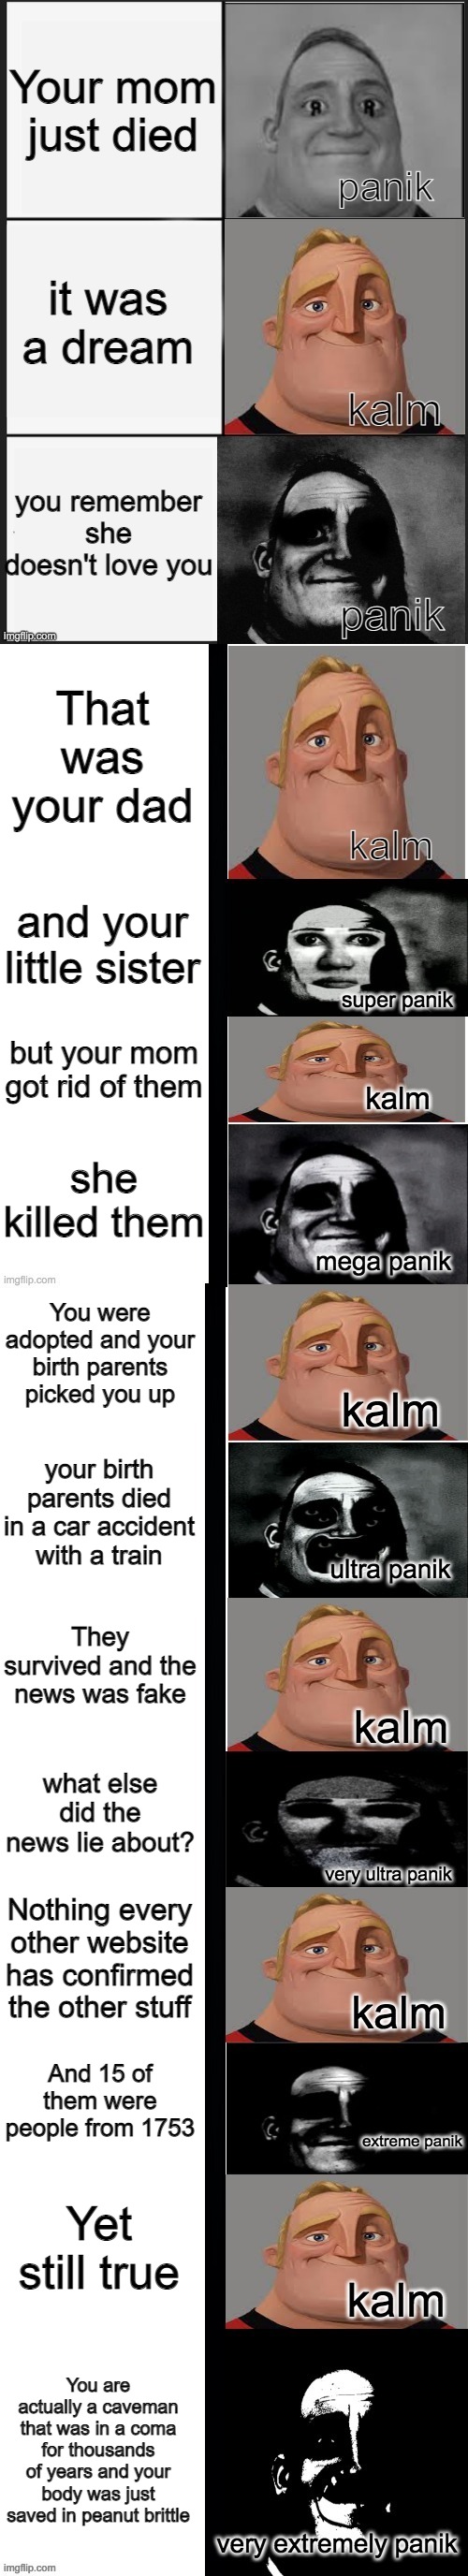 panik kalm panik (mr incredible 2nd extended) |  Your mom just died; it was a dream; you remember she doesn't love you; That was your dad; and your little sister; but your mom got rid of them; she killed them; You were adopted and your birth parents picked you up; your birth parents died in a car accident with a train; They survived and the news was fake; what else did the news lie about? Nothing every other website has confirmed the other stuff; And 15 of them were people from 1753; Yet still true; You are actually a caveman that was in a coma for thousands of years and your body was just saved in peanut brittle | image tagged in panik kalm panik mr incredible 2nd extended | made w/ Imgflip meme maker